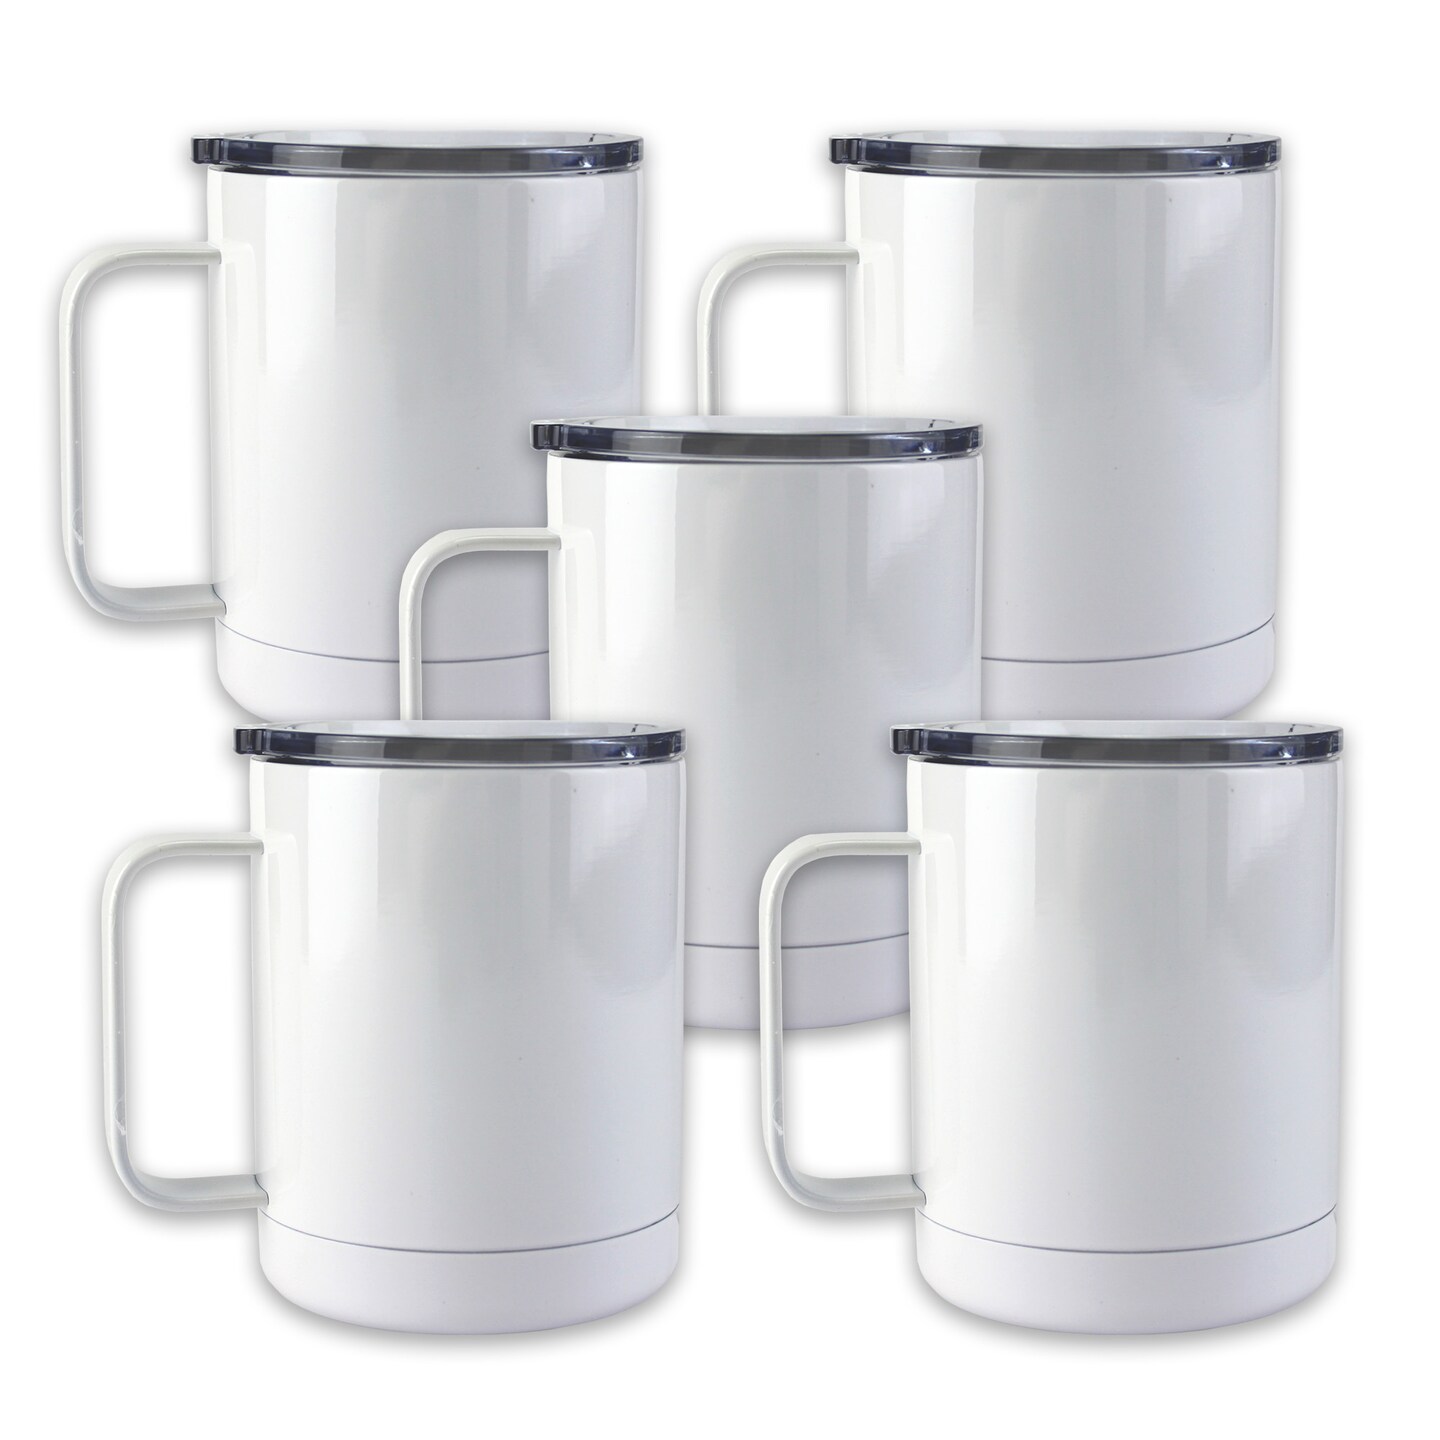 Blank 10oz White Stainless Steel Coffee Cup for Sublimation and Heat Transfer Printing